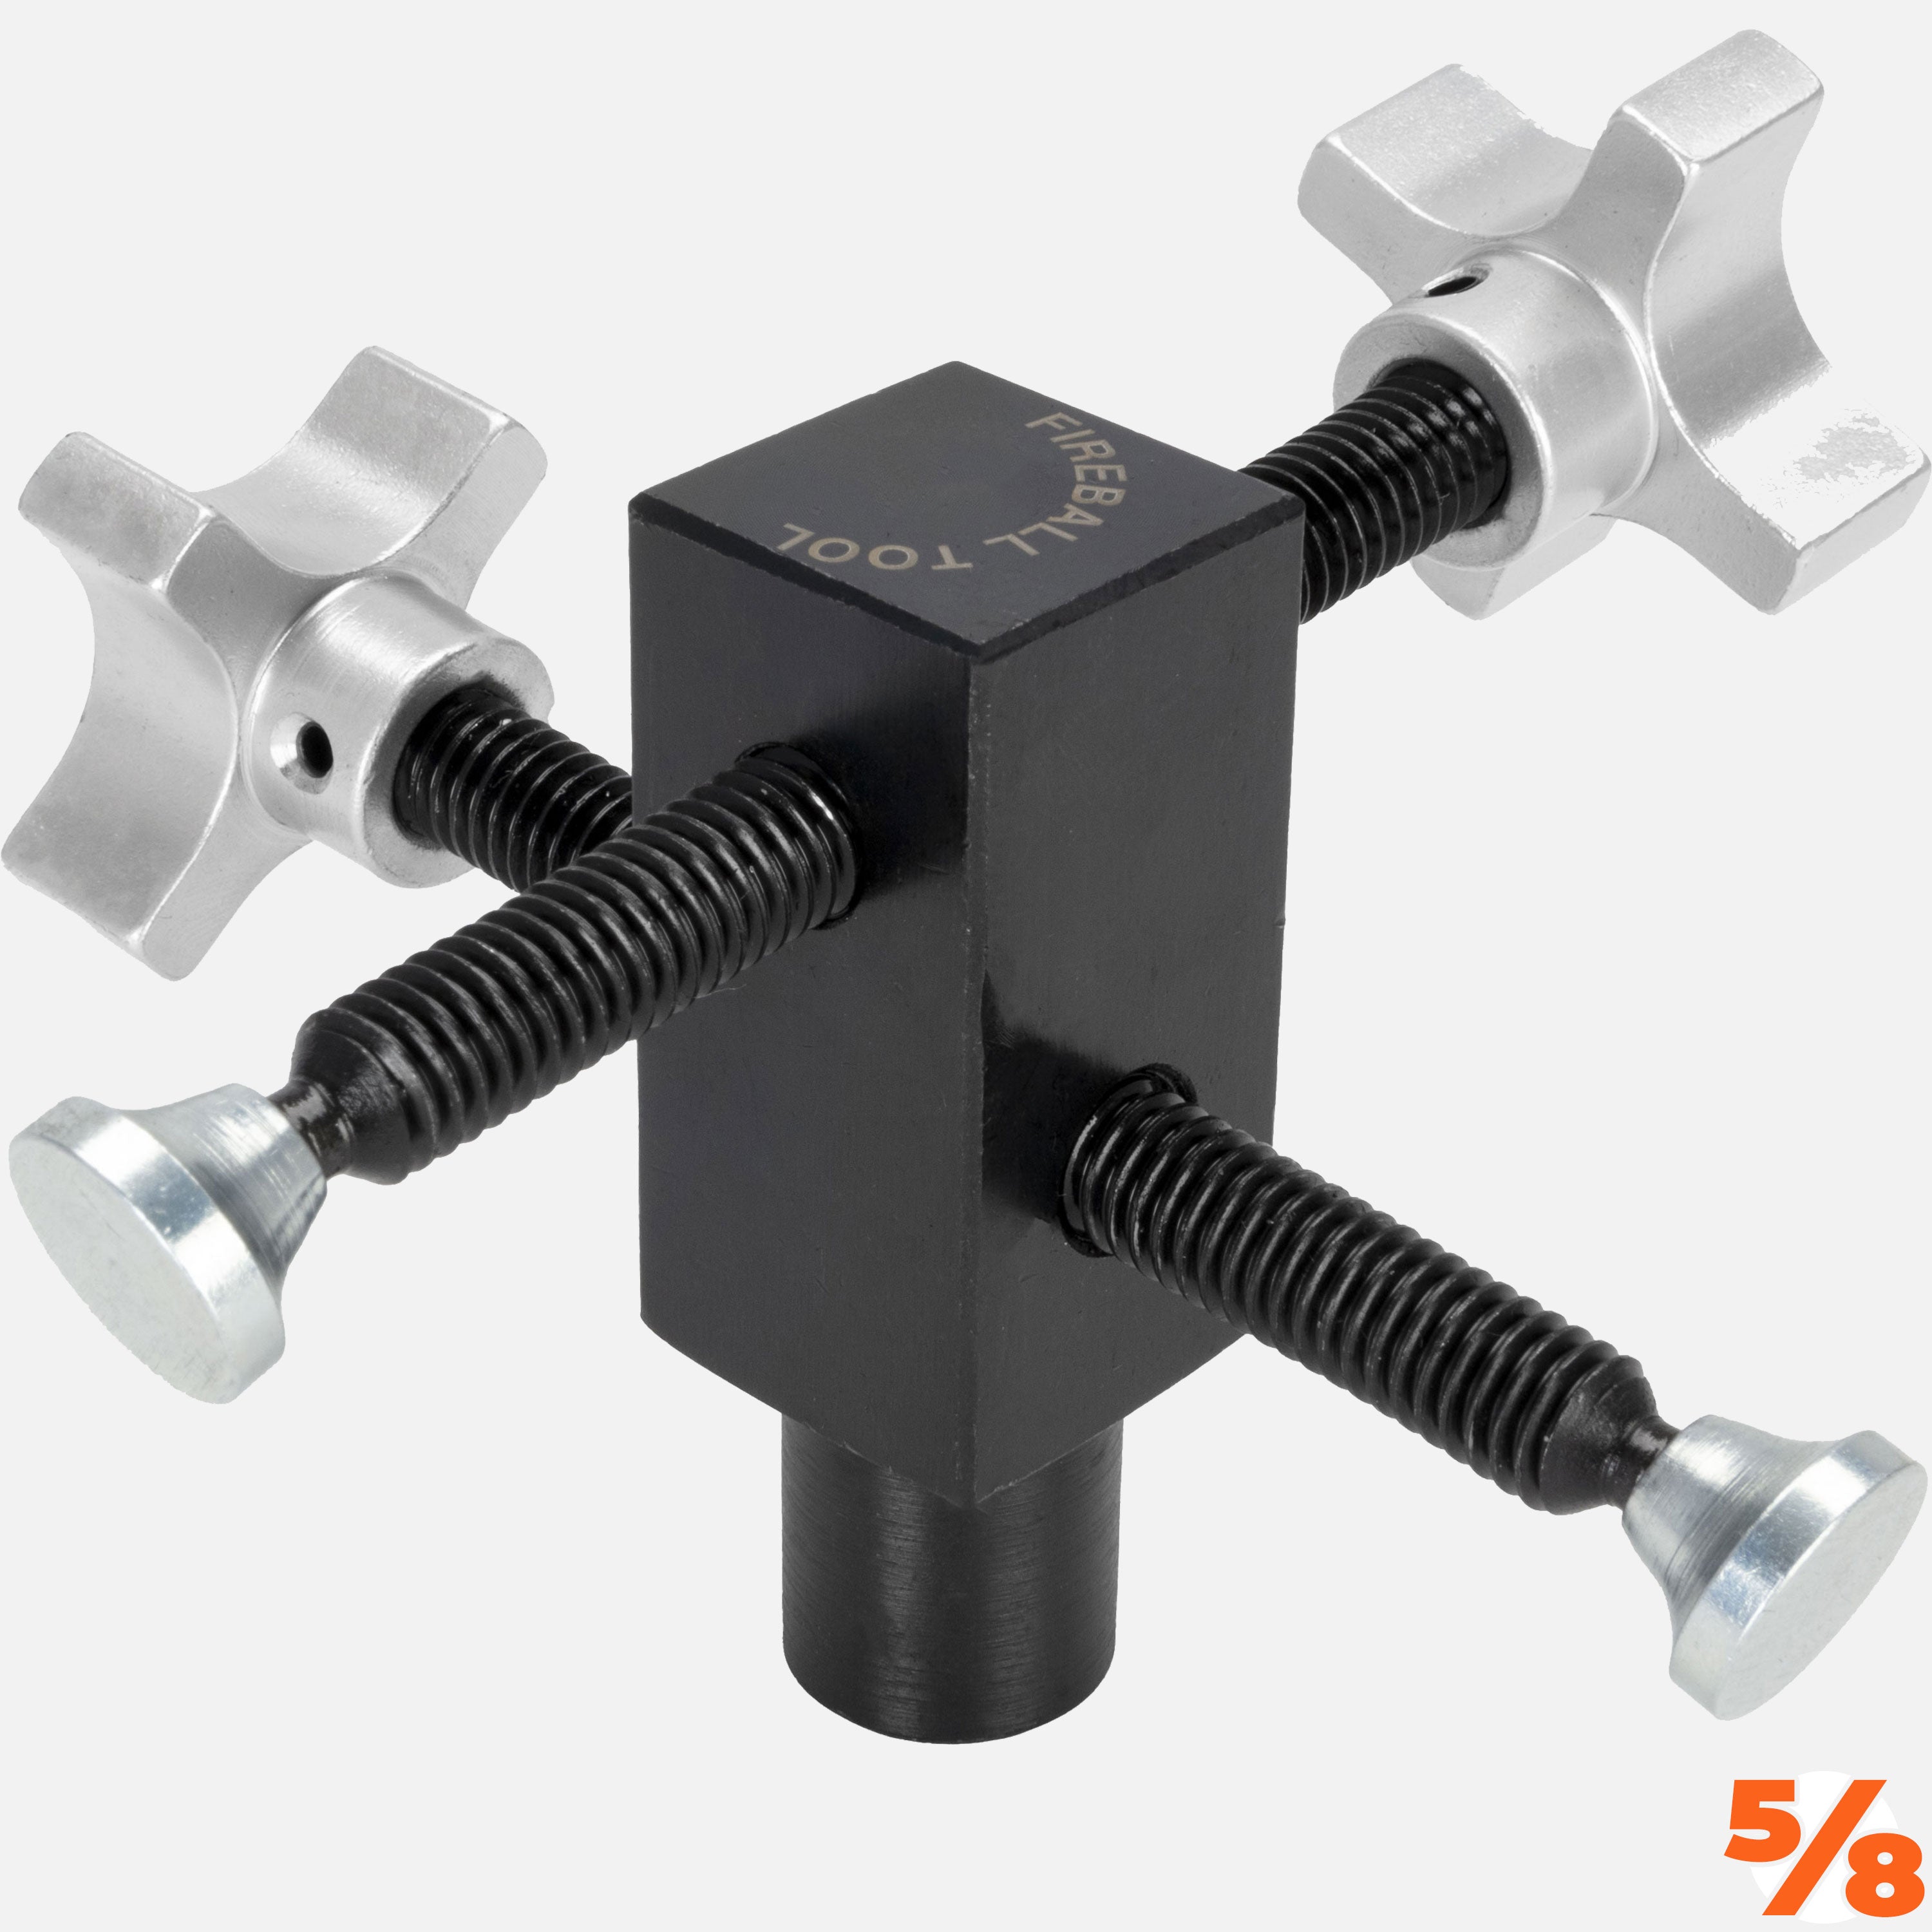 Side Push Clamp [5/8" System]